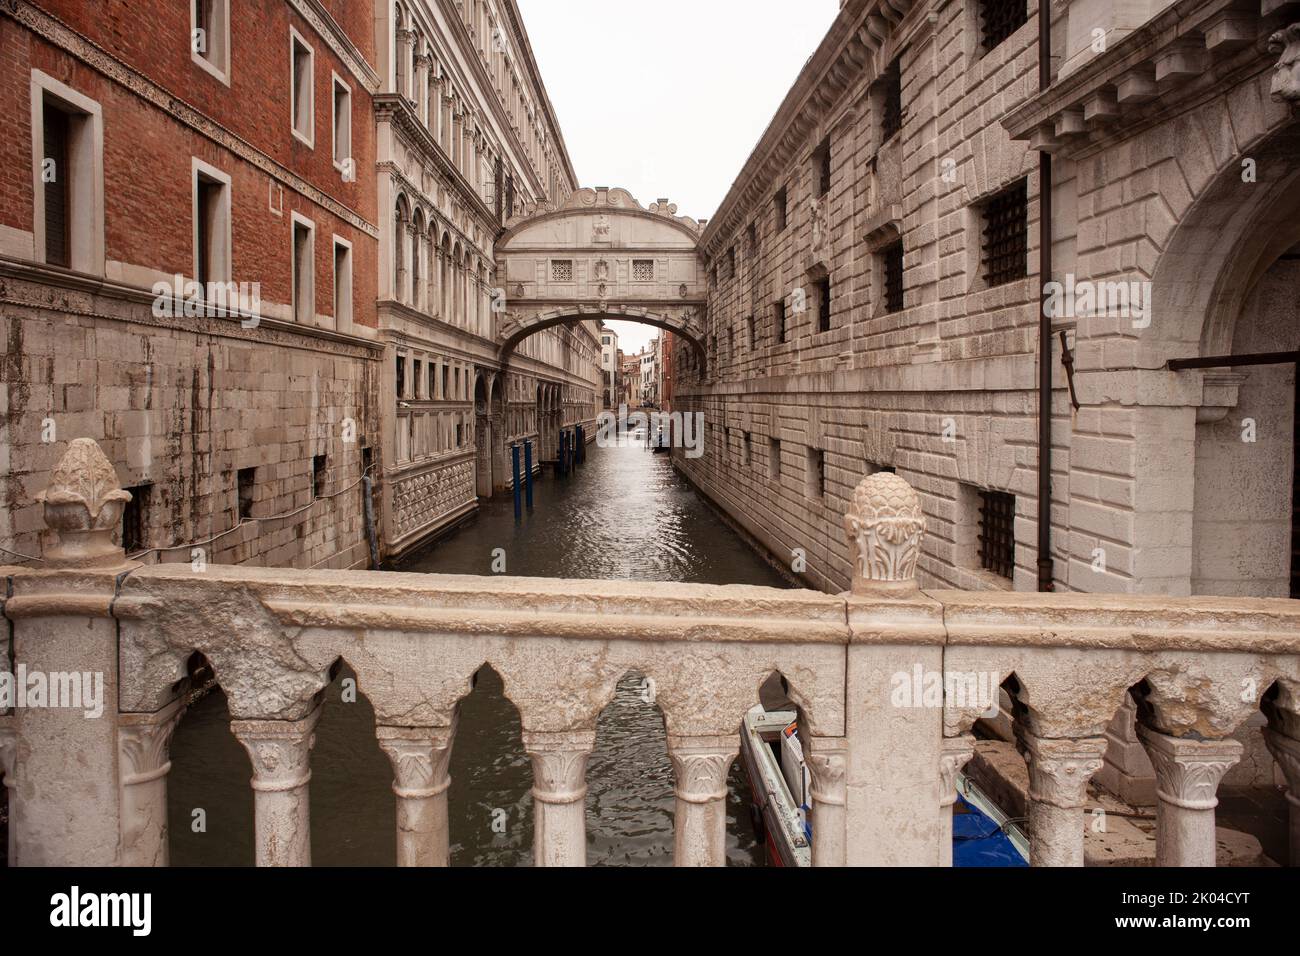 View of the famous and scenic Bridge of Sighs in Venice Stock Photo